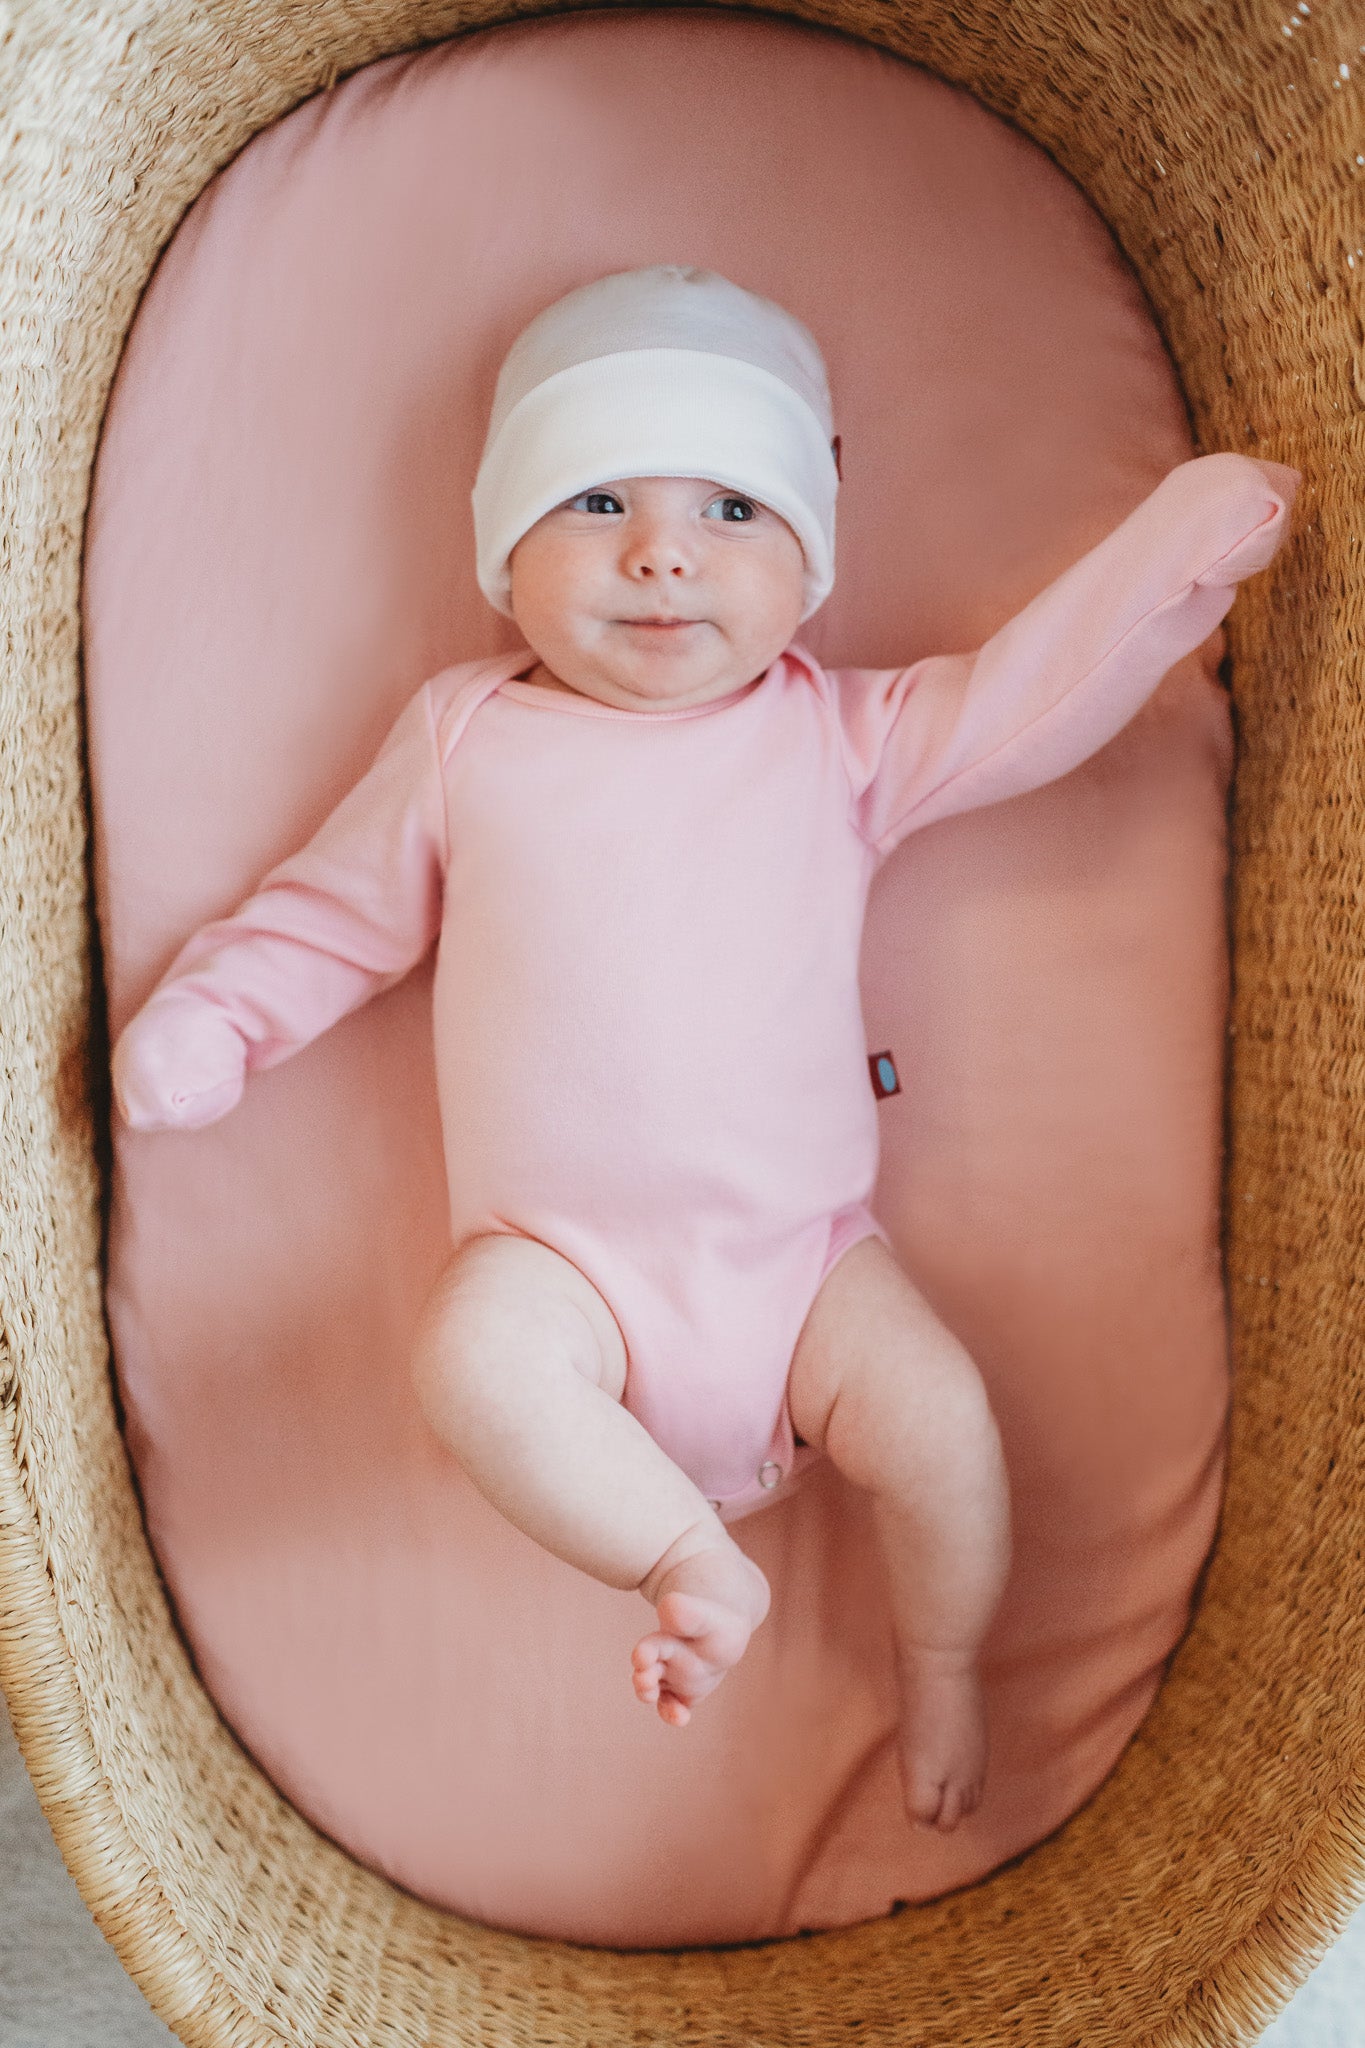 Baby laying comfortably in a bassinet wearing organic cotton long sleeve onesie